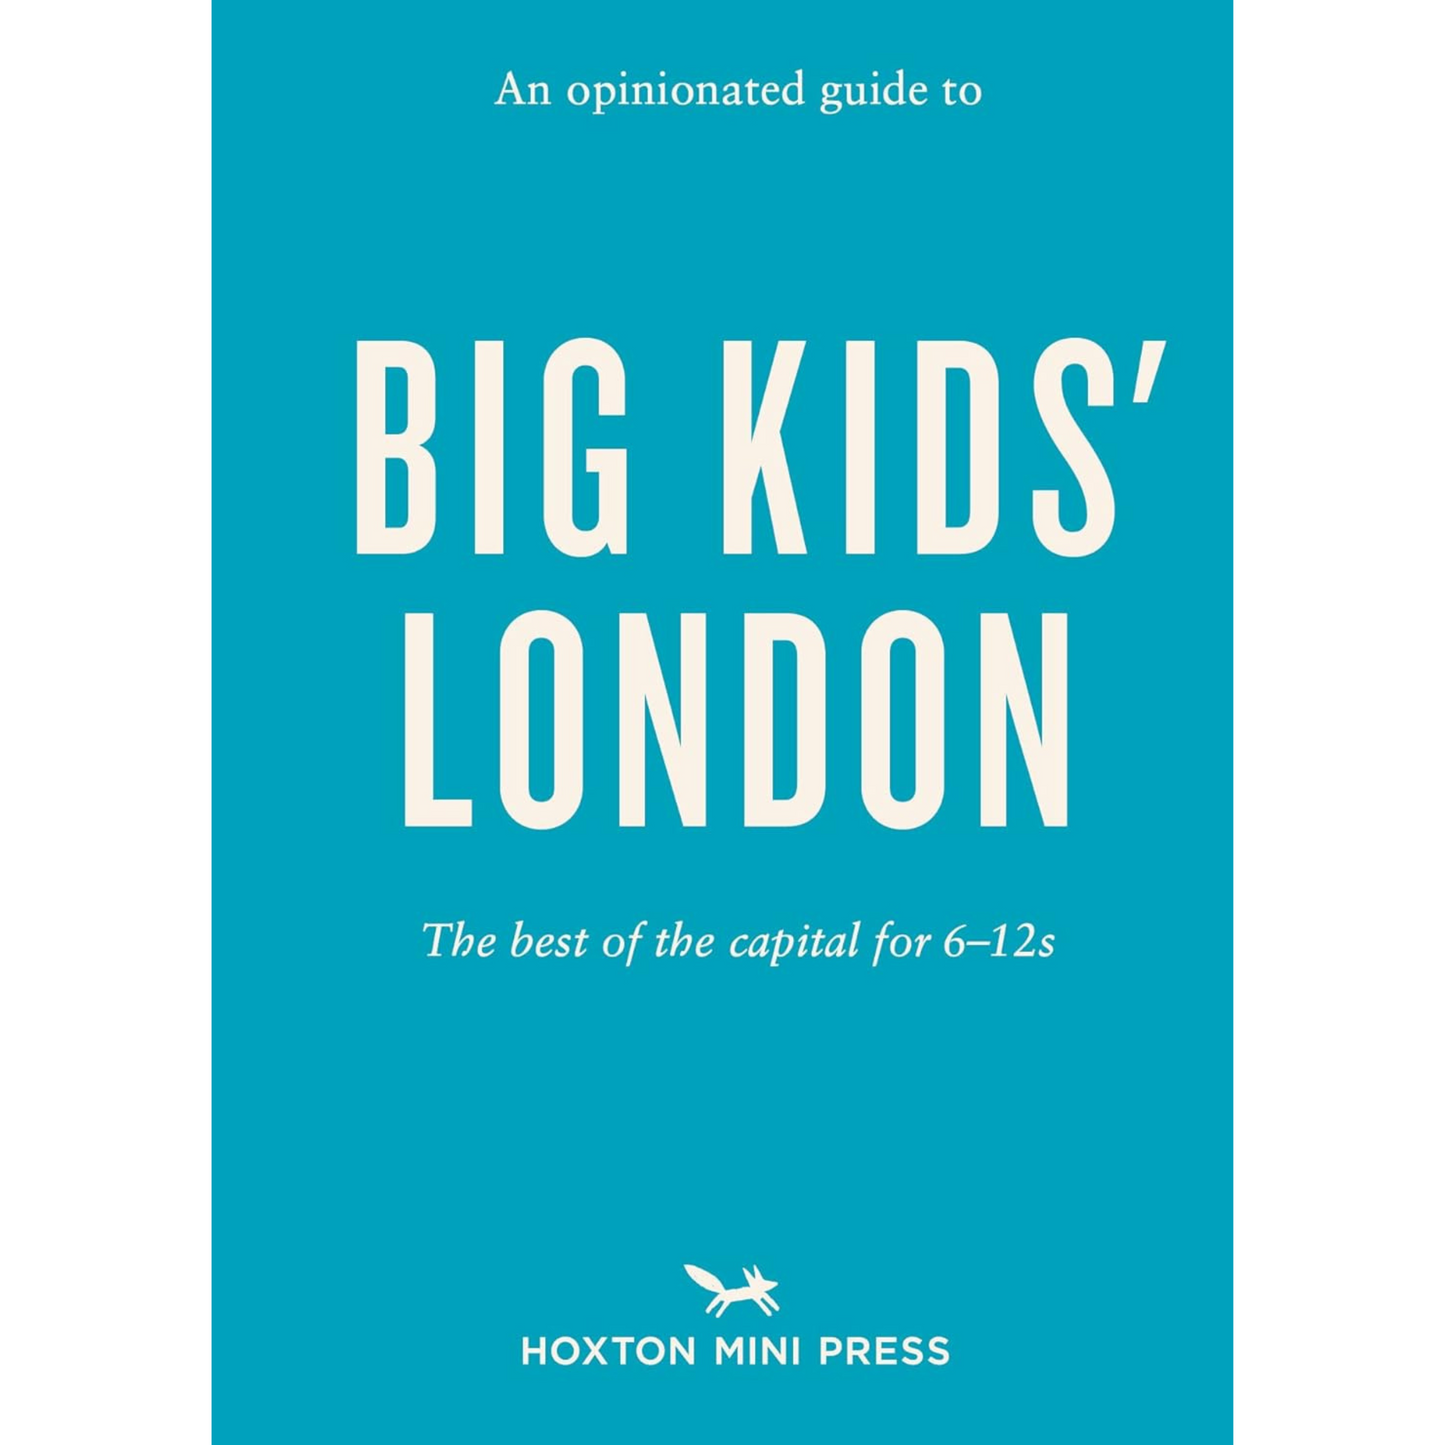 An Opinionated Guide To Big Kids' London